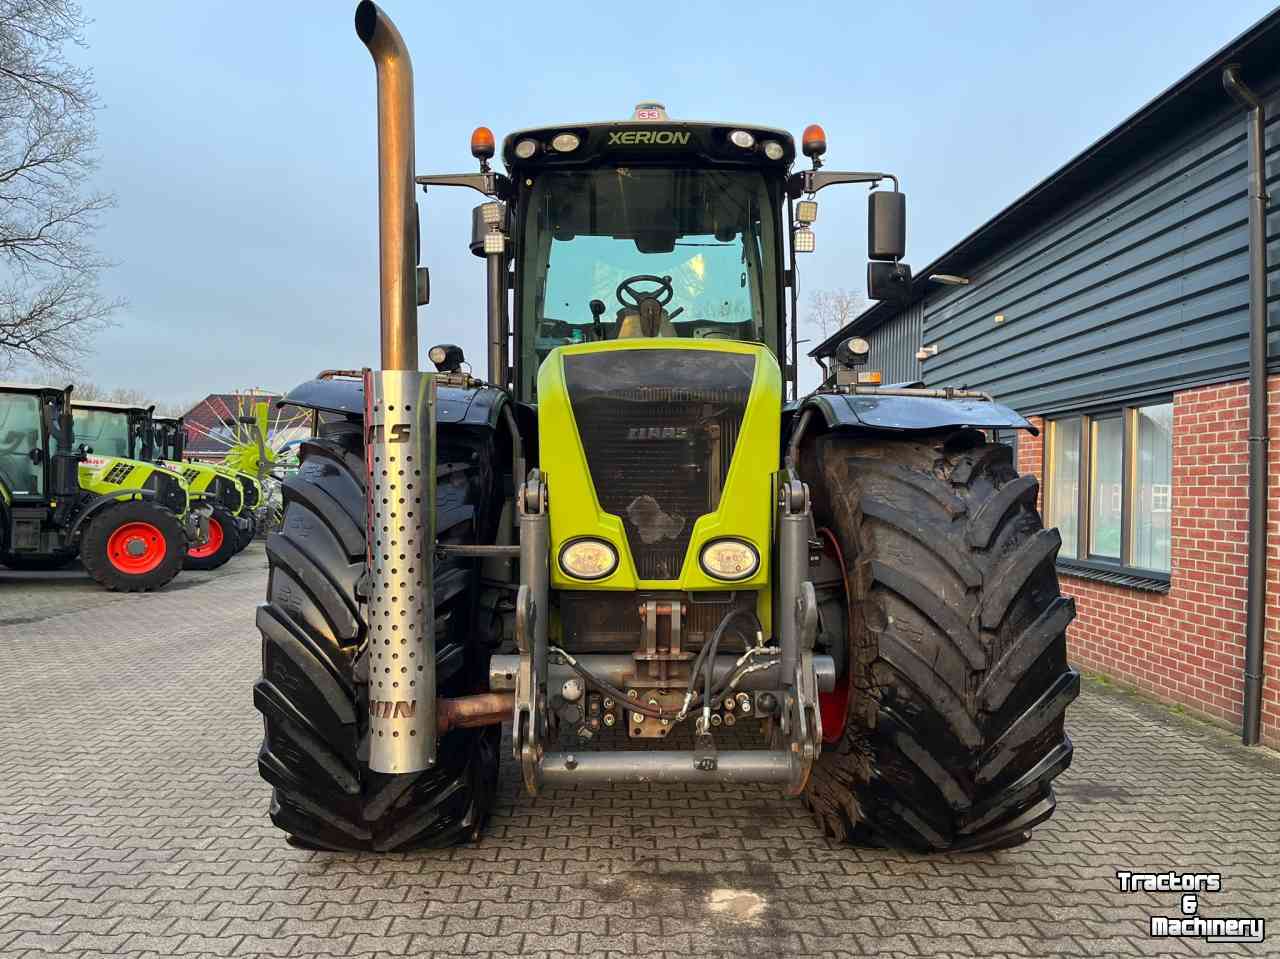 Tractors Claas Xerion 3800 Trac VC